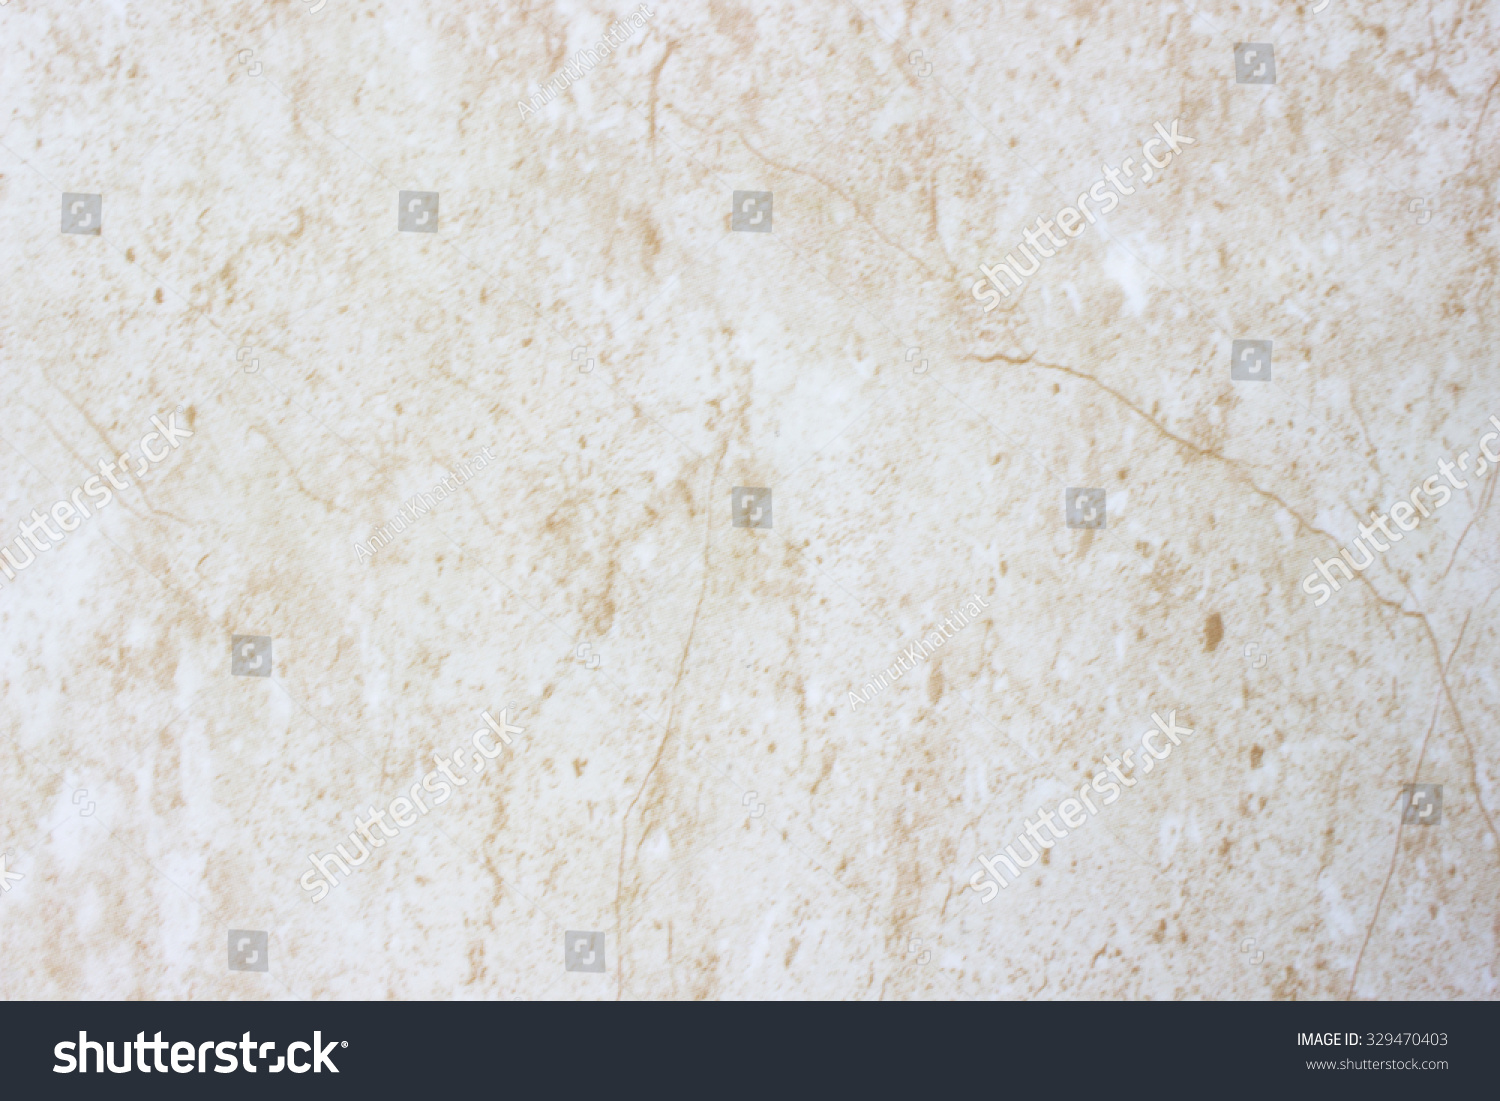 Soft Focus Marble Texture Background Stock Photo 329470403 | Shutterstock